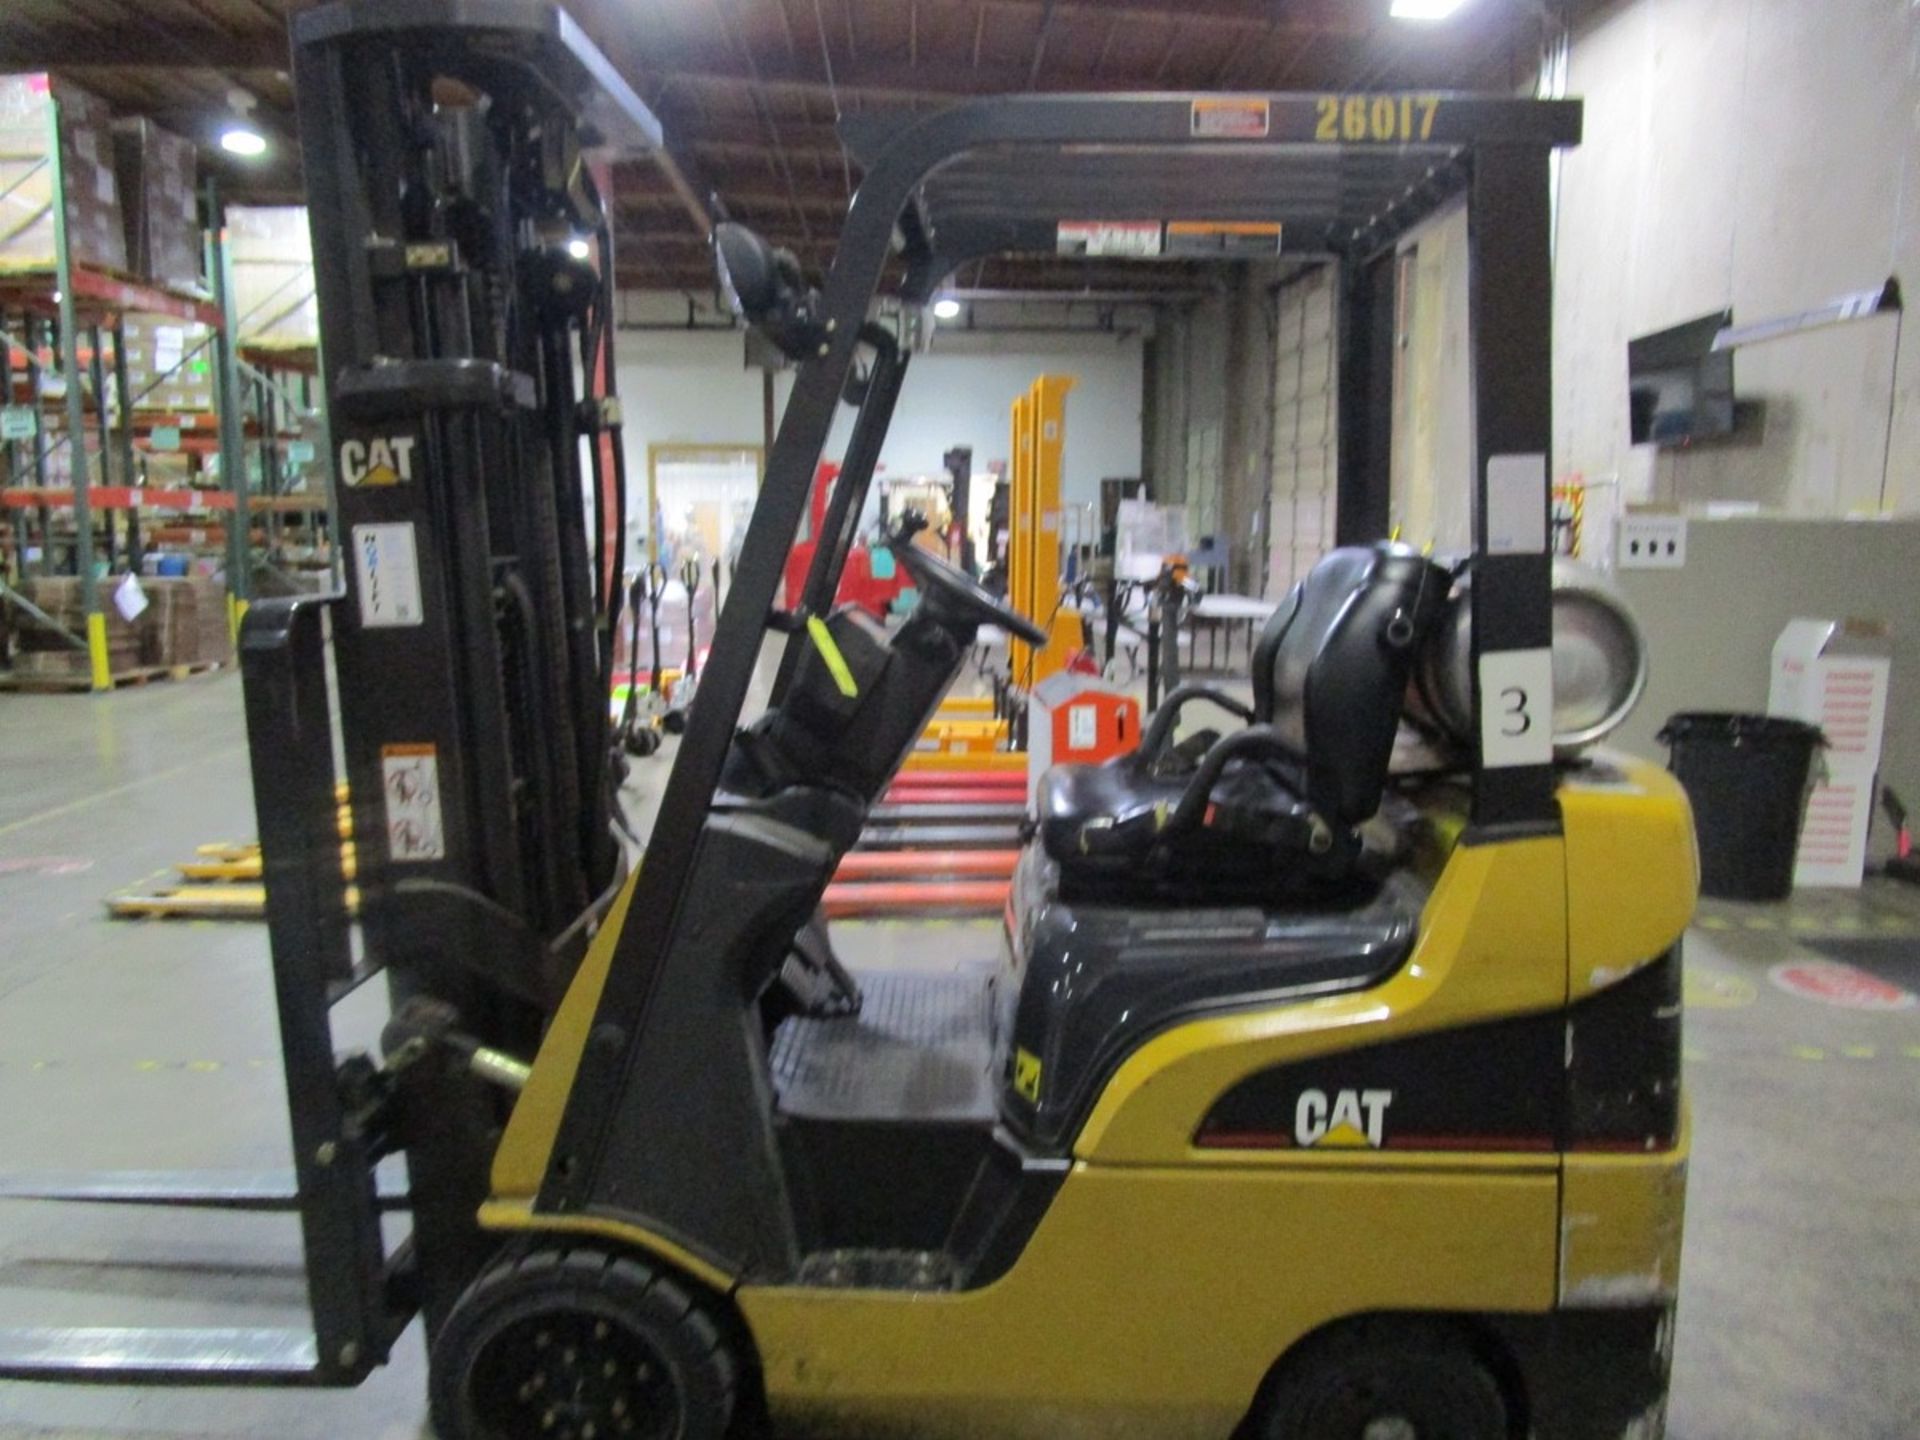 Cat CC4000 LPG Forklift s/n AT81F50079 (Delivery - 4/3/20), 1700 Hours, 3,125 #, 200 | Rig Fee: $100 - Image 4 of 7